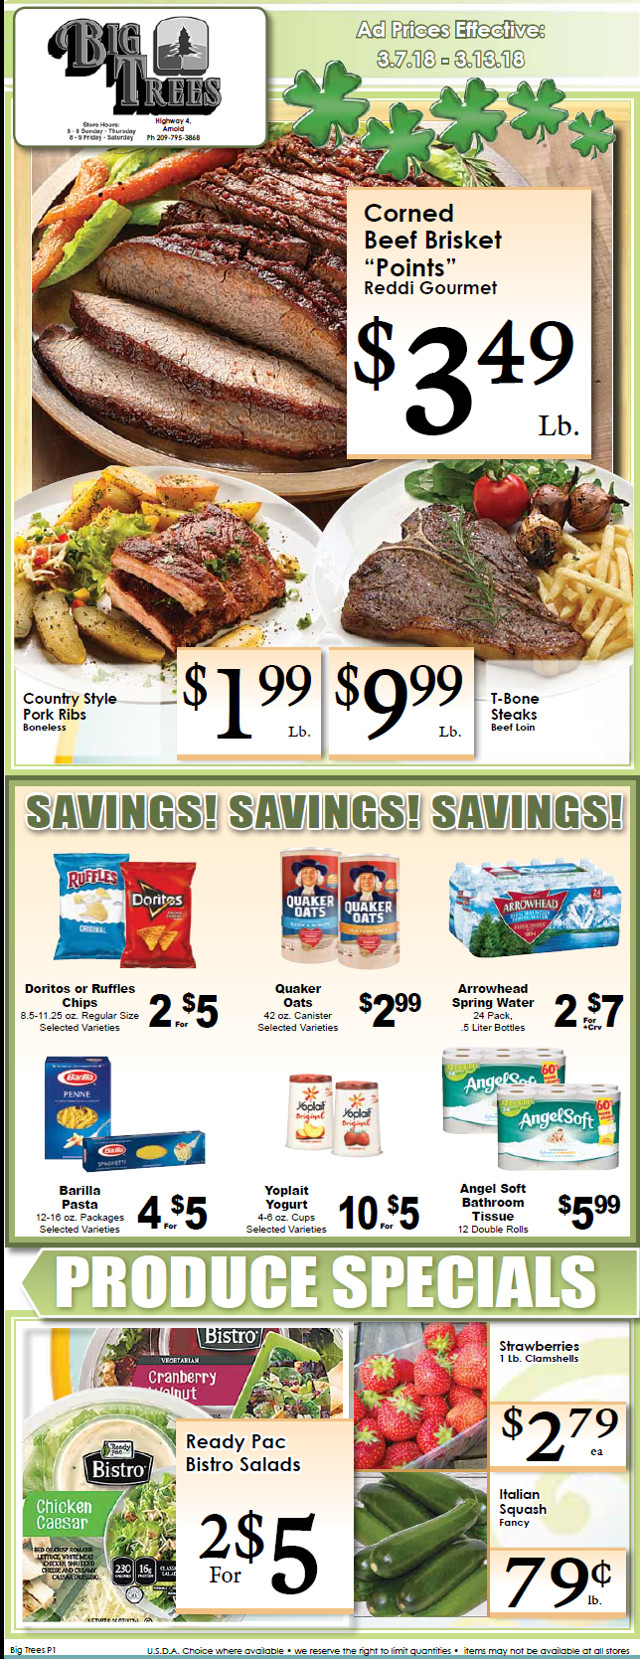 Big Trees Market Weekly Ad & Specials Through March 13th